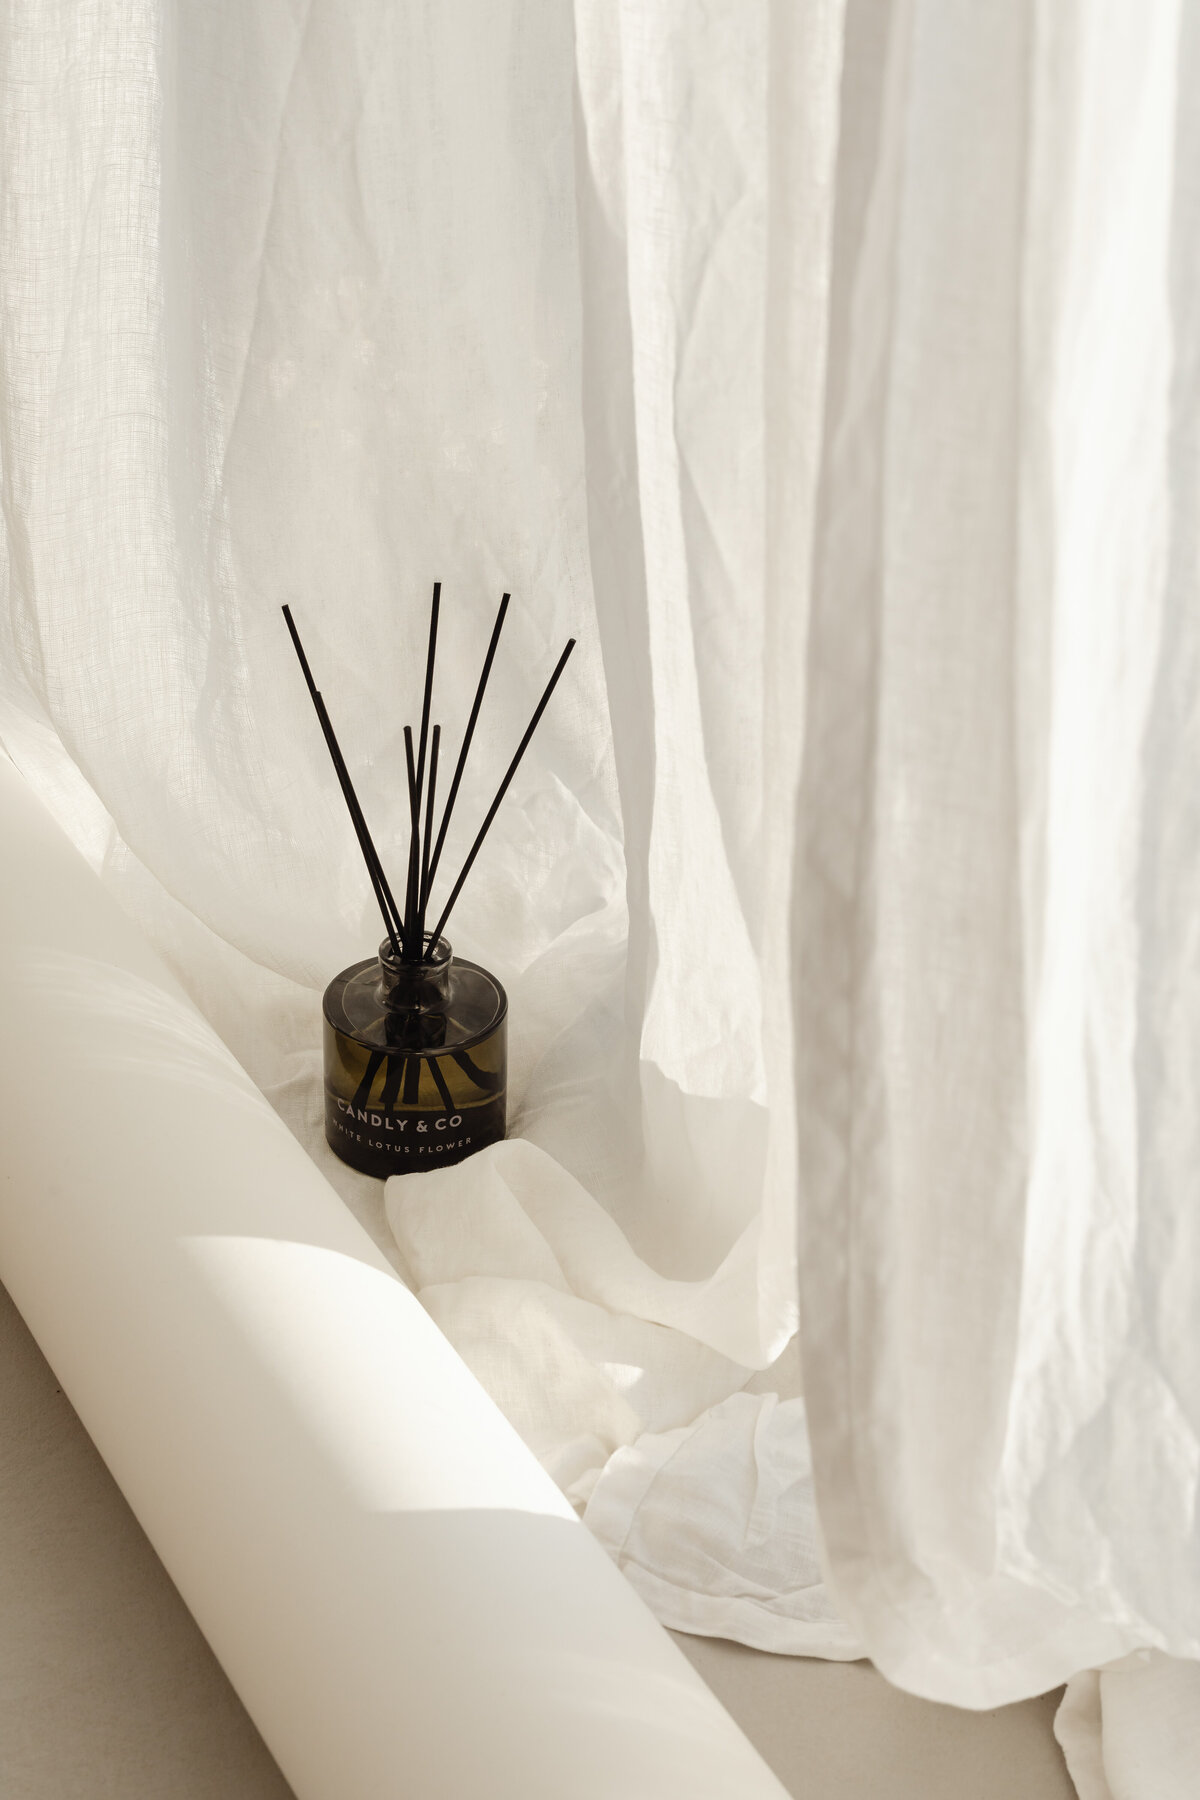 kaboompics_candles-and-diffusers-candly-fragrances-product-packaging-design-29809